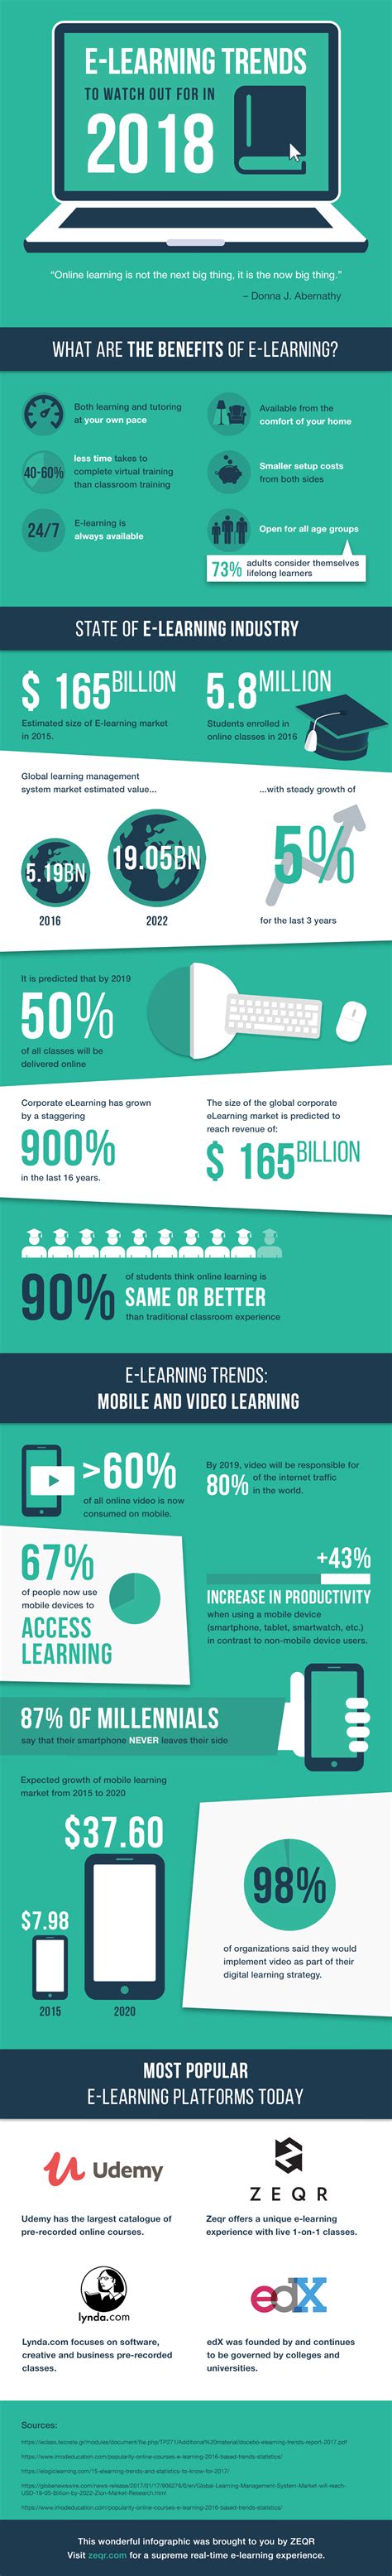 E Learning Trends To Watch Out For In 2018 Infographic